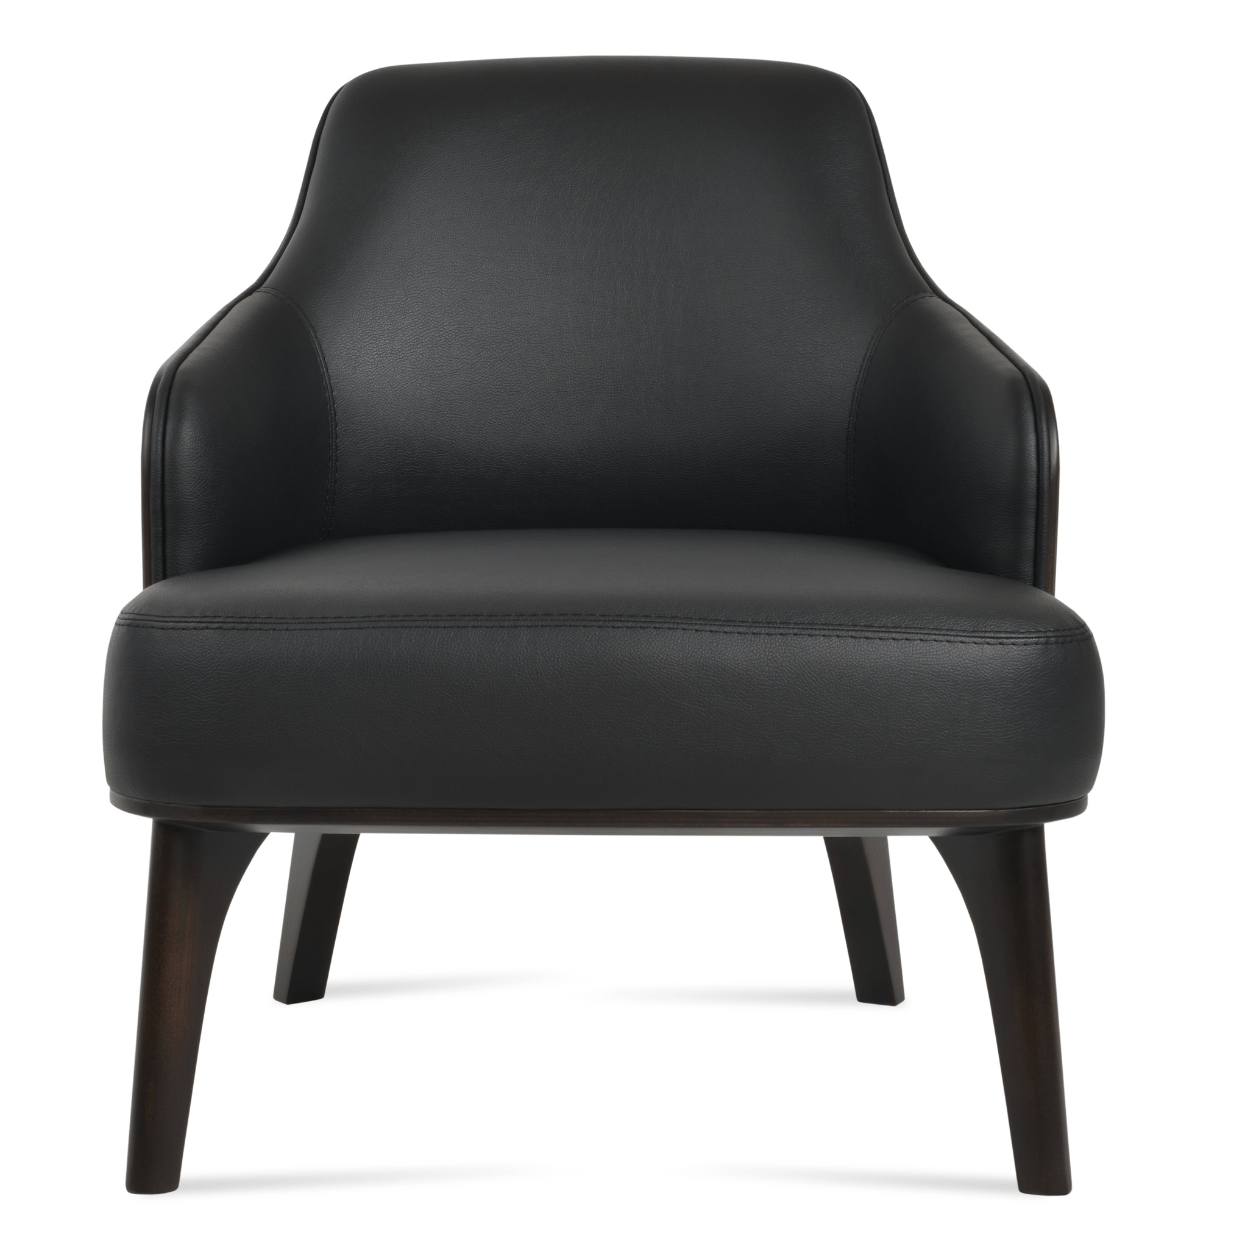 Saphire Rounded Black Leather Armchair - Your Bar Stools Canada